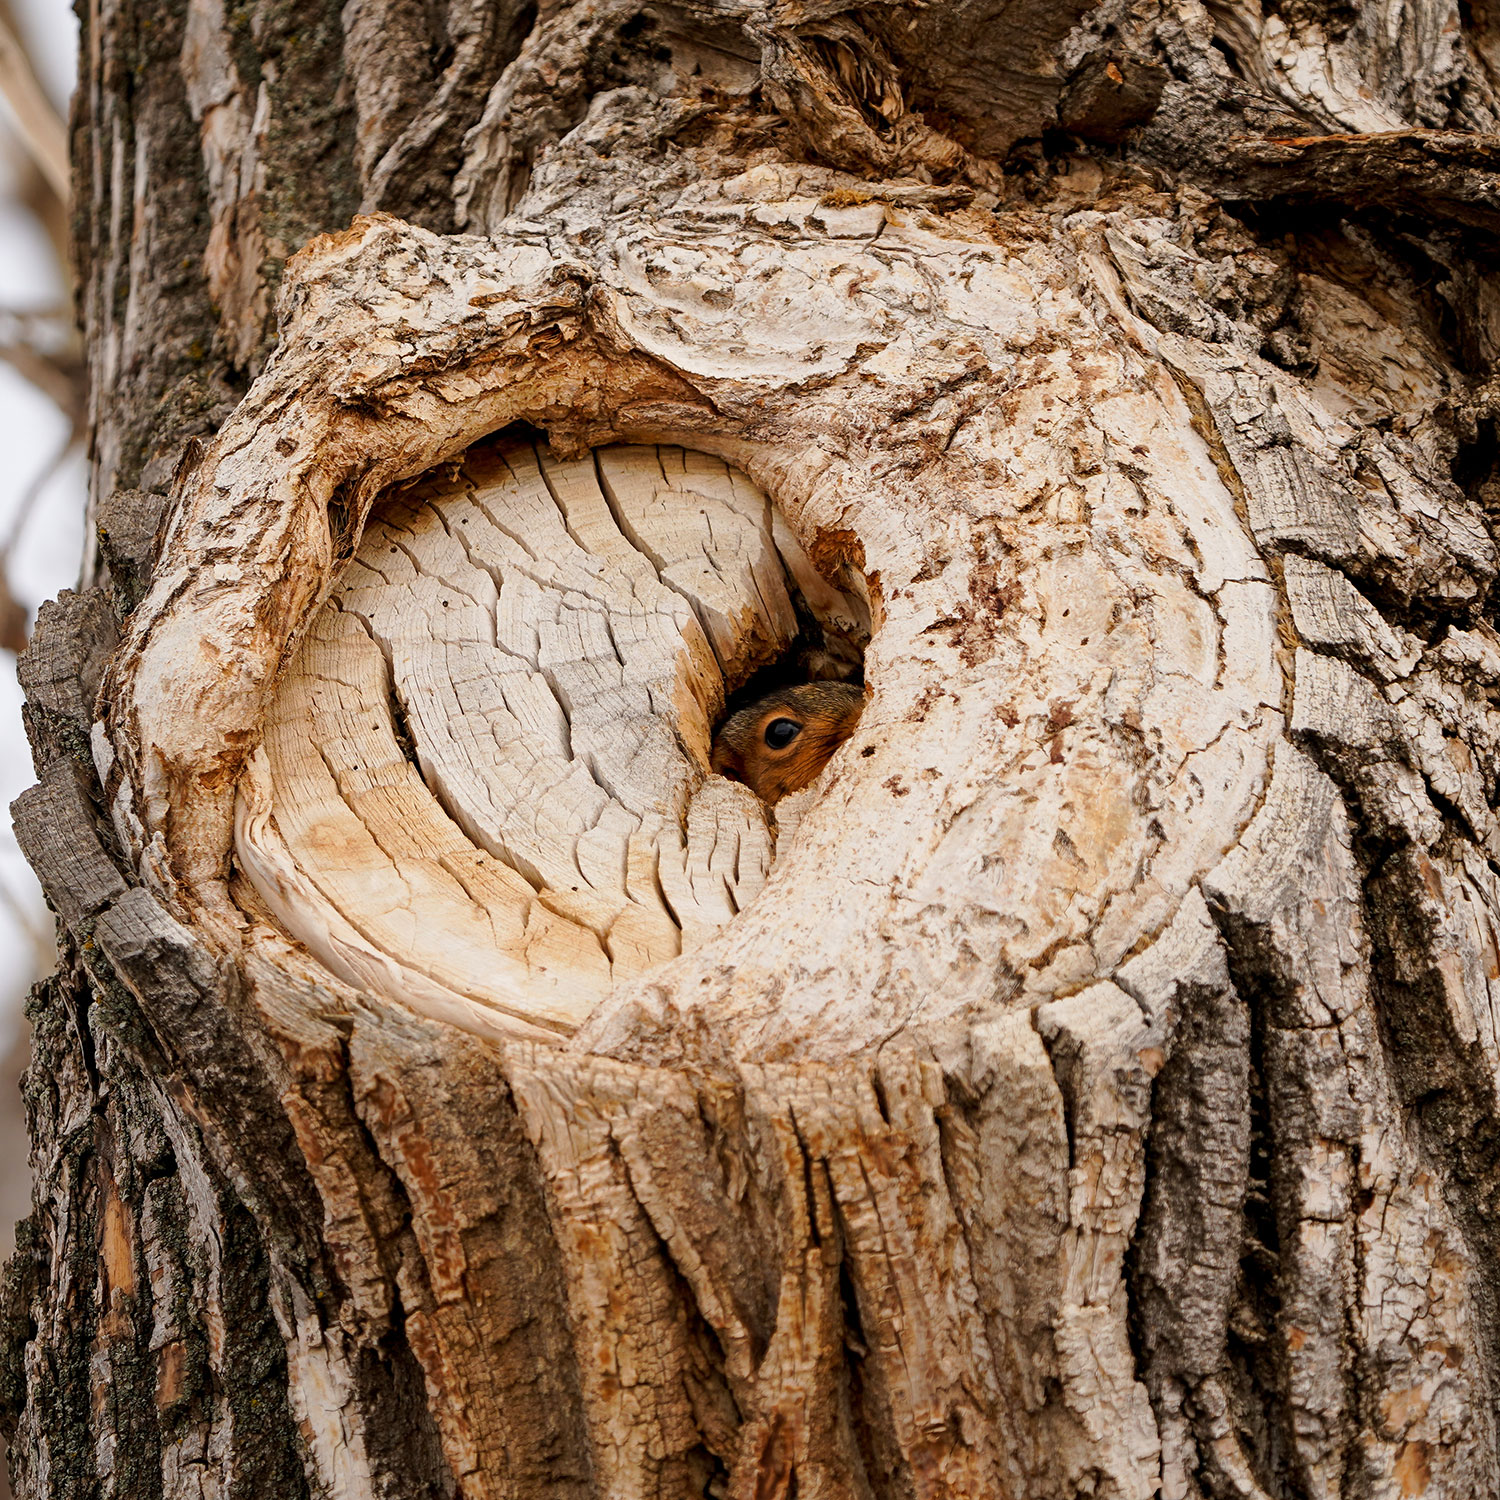 Squirrel peeking out a hole in a tree